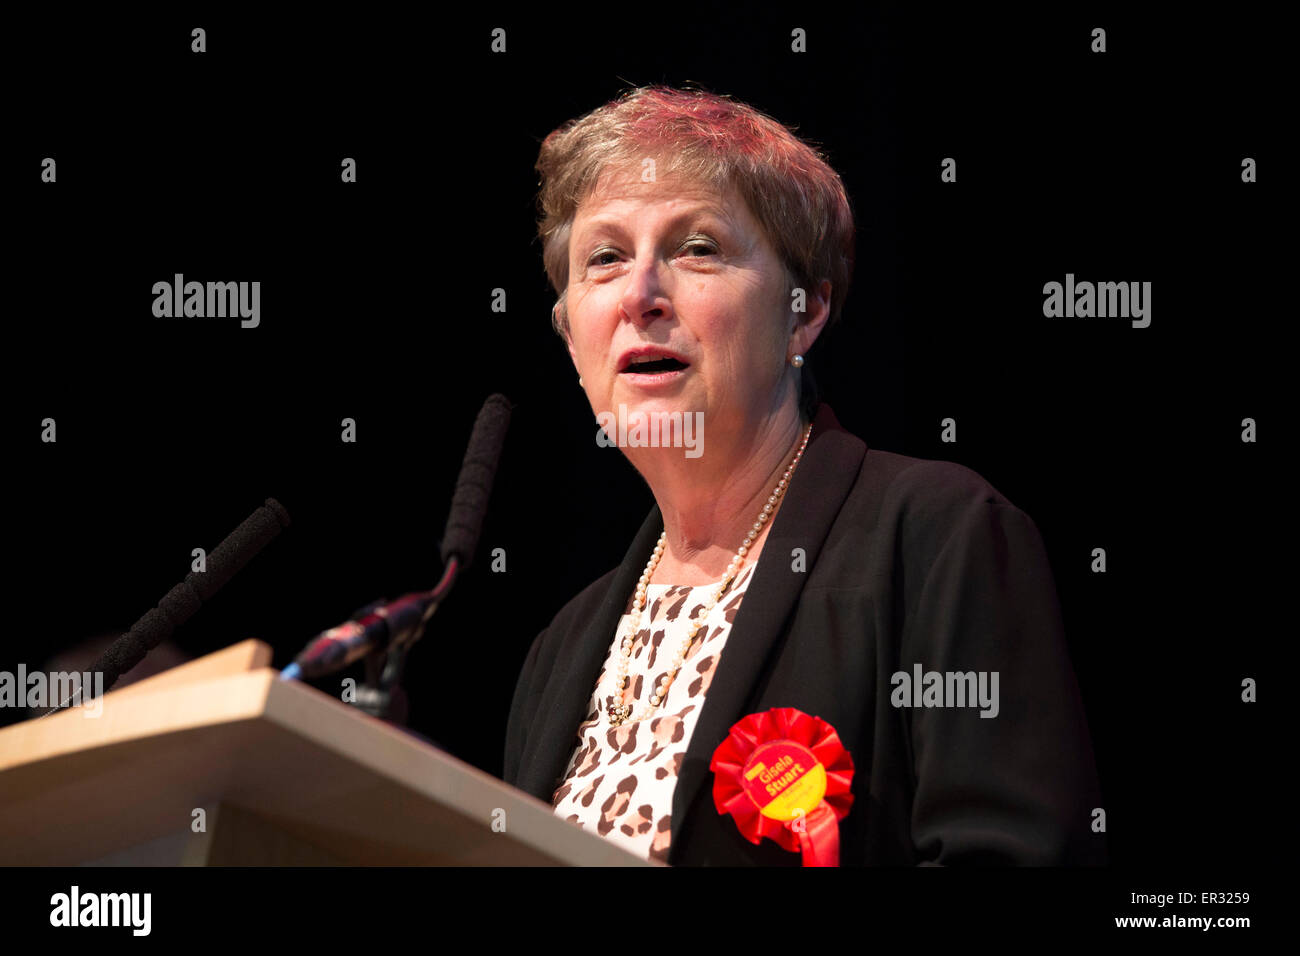 Gisela Stuart Labour MP for Edgbaston Birmingham since 1997 pictured retaining her seat at the general election 2015 Stock Photo